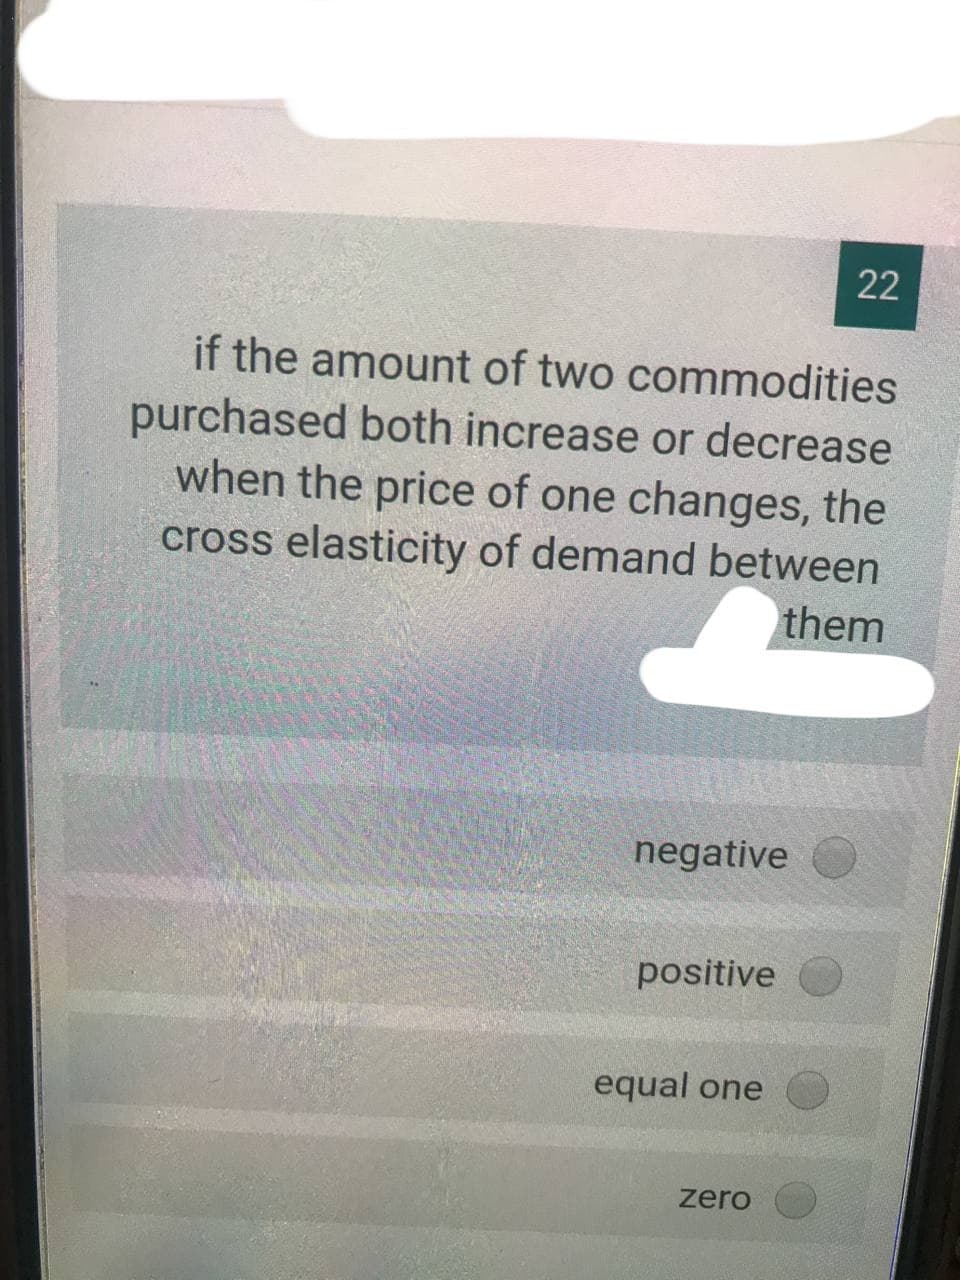 22
if the amount of two commodities
purchased both increase or decrease
when the price of one changes, the
cross elasticity of demand between
them
negative
positive
equal one
zero
